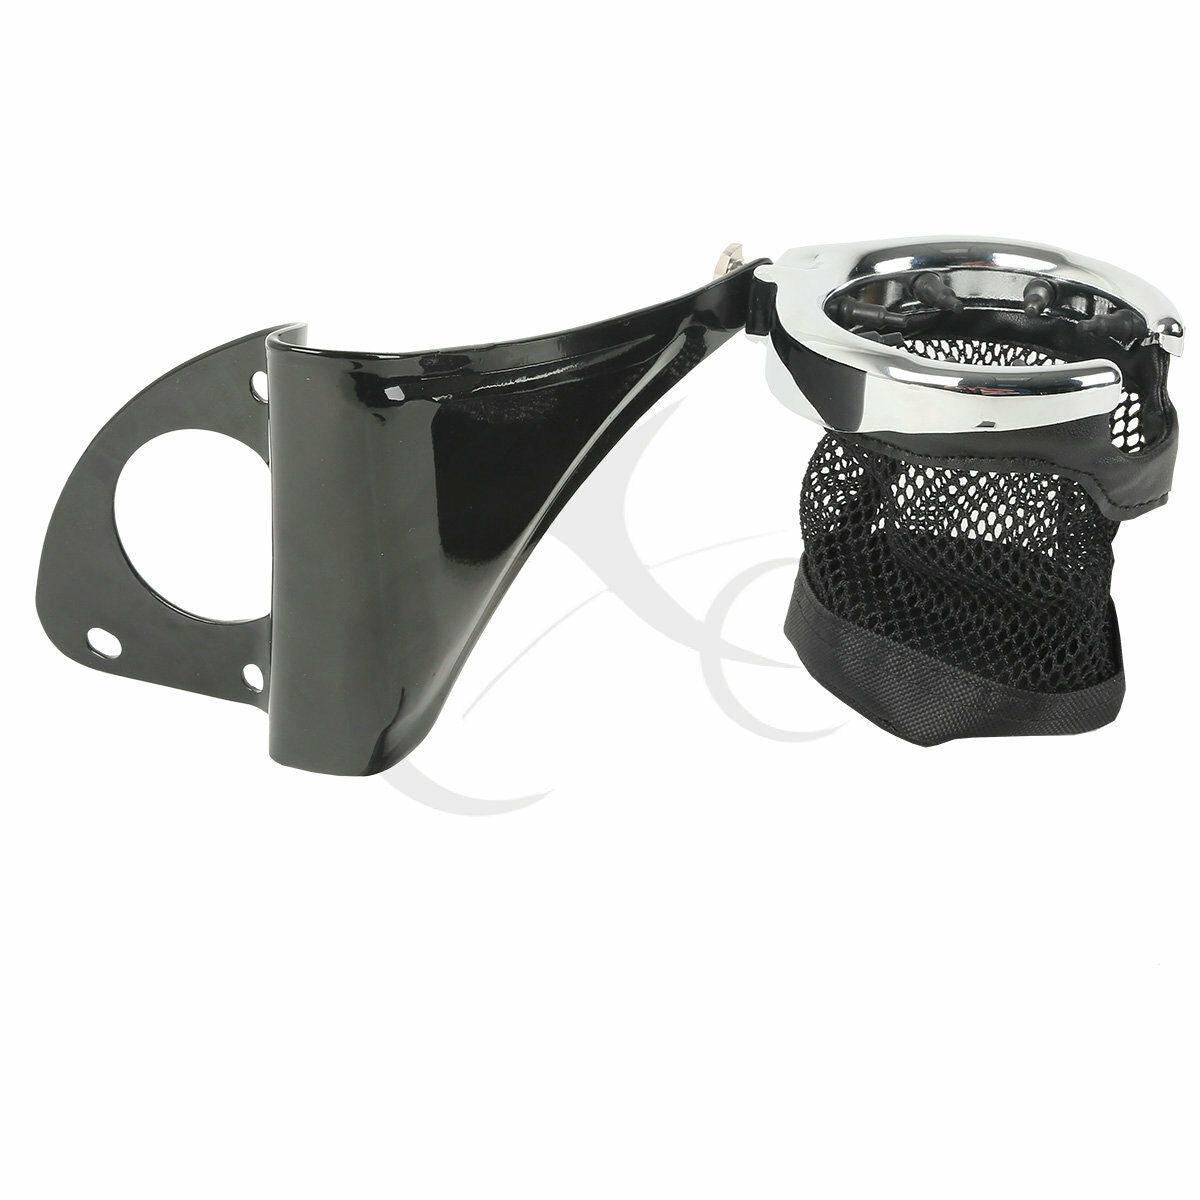 Passenger Drink Cup Holder fit For Harley Touring Electra Glide Ultra Limiteds - Moto Life Products